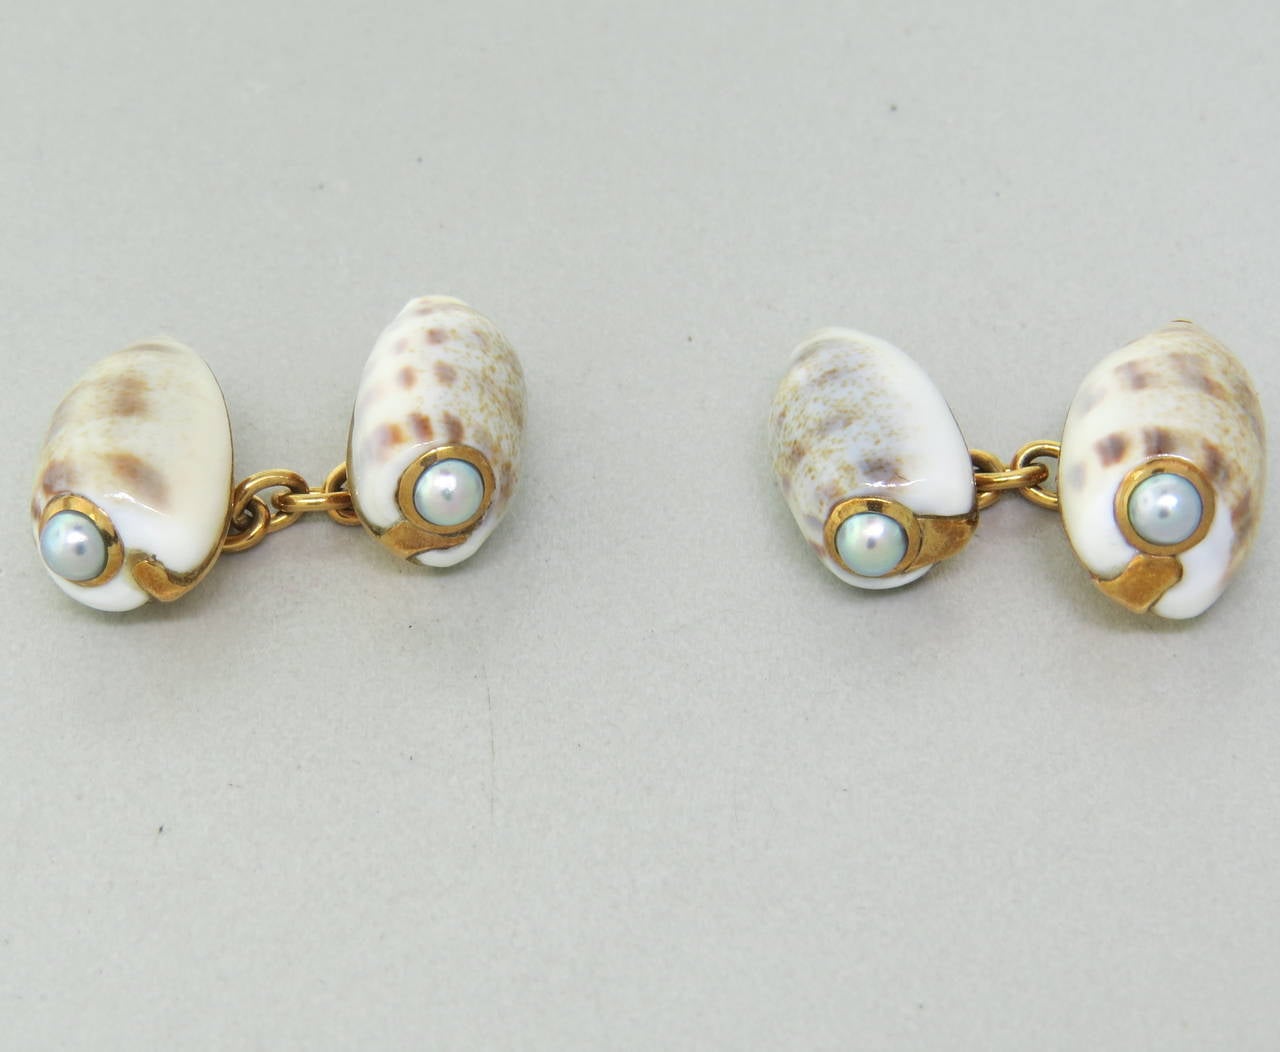 18k gold cufflinks by Trianon, featuring shell top with pearls. Top of the cufflink - 18mm x 11mm.  weight - 10.2gr